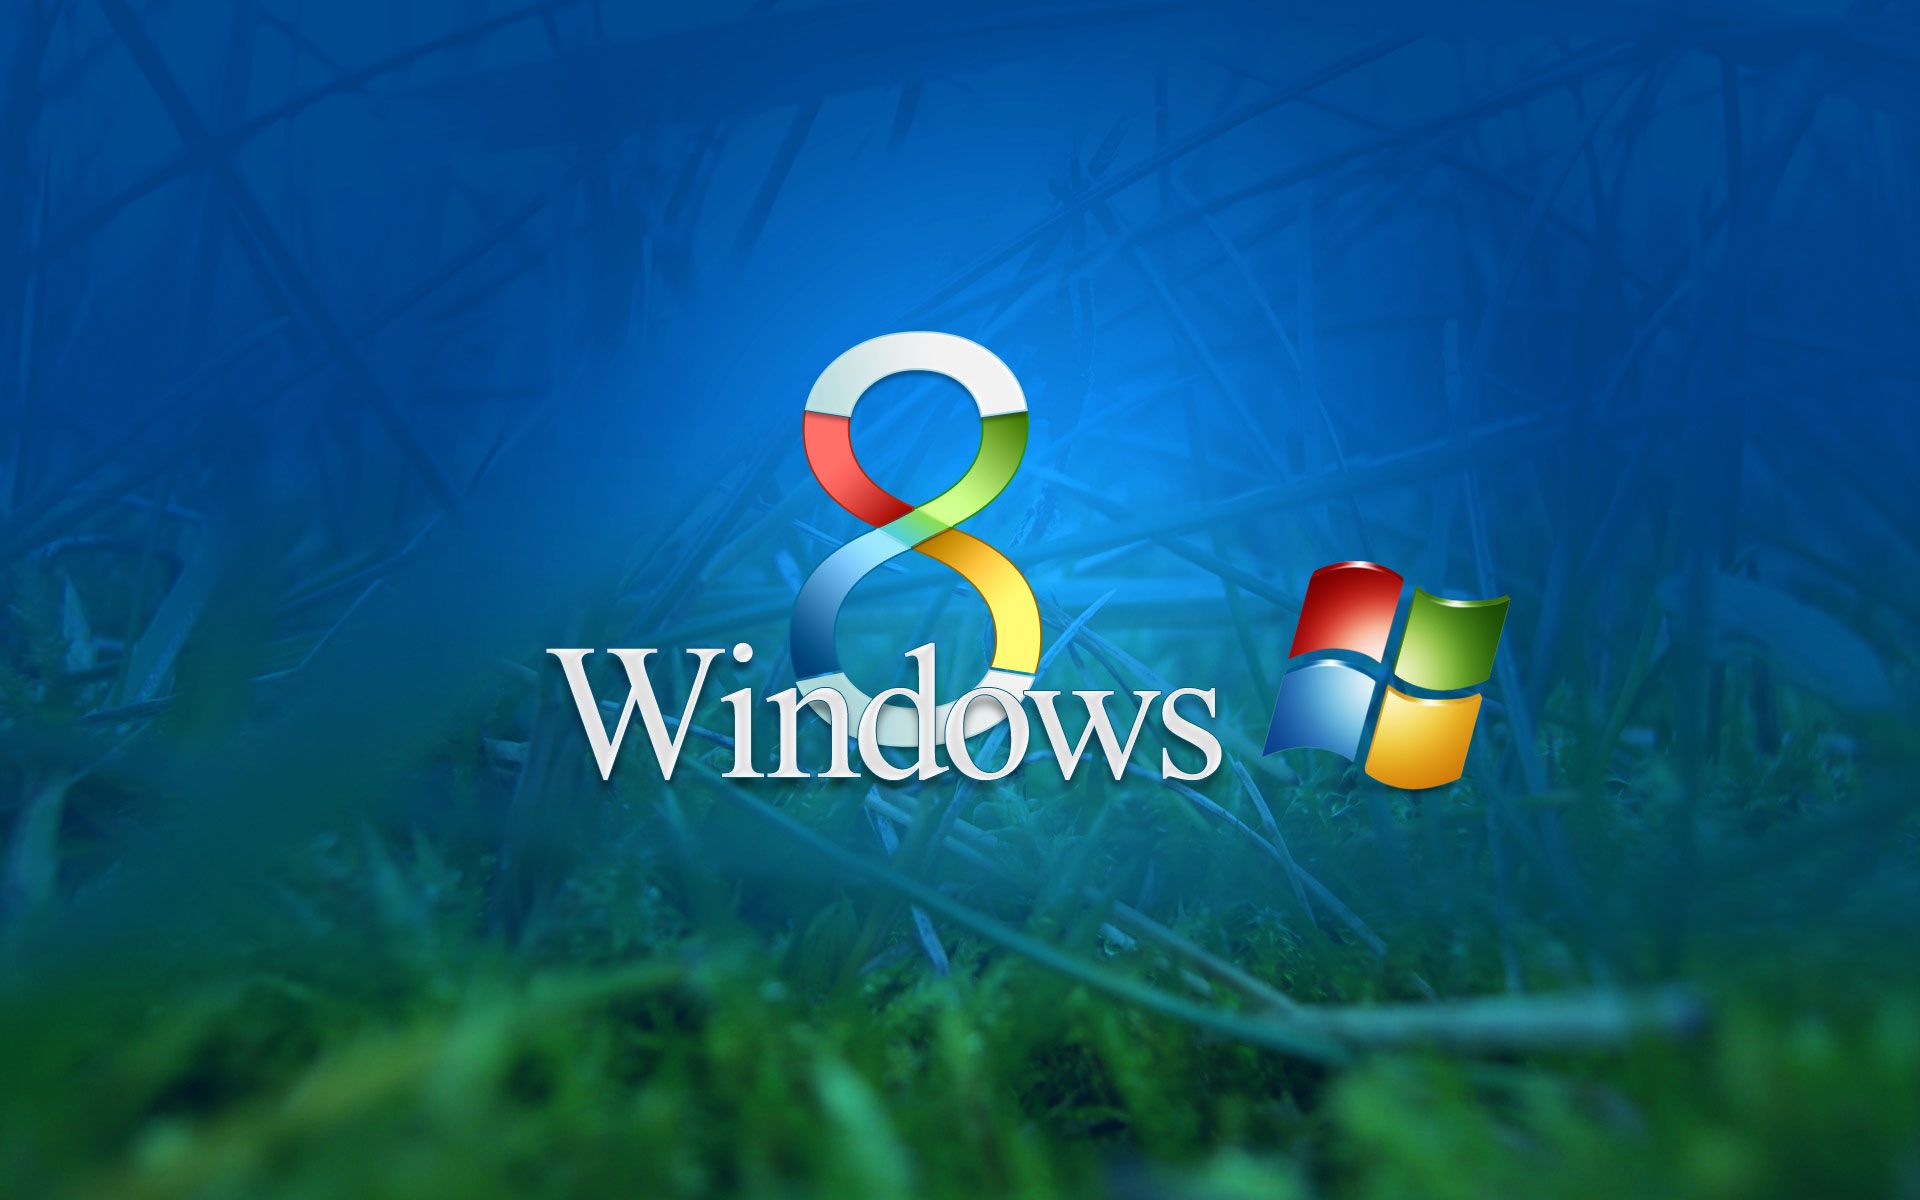 Windows 8 HD Wallpapers Windows 8 Images Free Cool Backgrounds